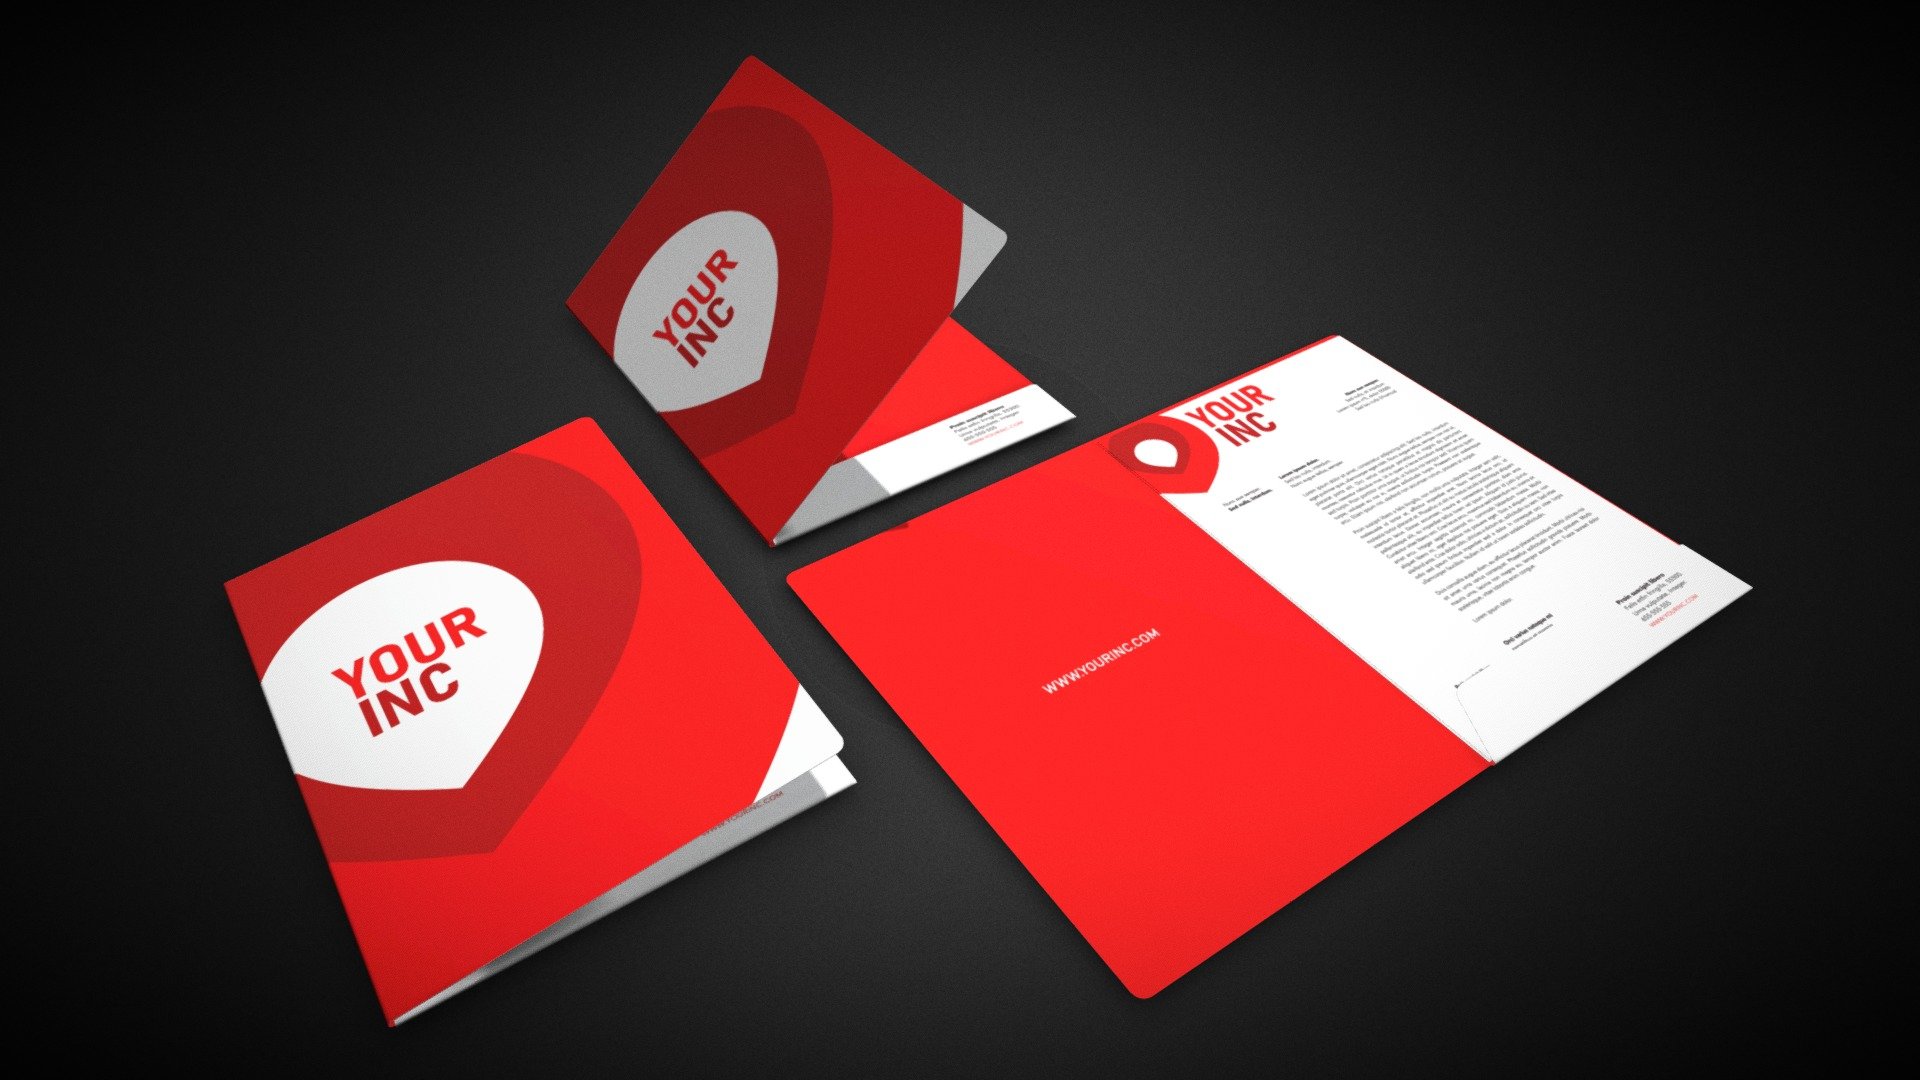 Pack of flap folders 3d models for branding and corporative identity usage.
Ideal for graphic designers.
*   Compatible with most popular 3d software like Elements or Unity.
*   UV maps included .Tif format with a ready guide set.(Photoshop) 
*   UV Dimensions: 42,9cm x 42,9cm. 
*   3 materials , 2 for main faces , 1 for edeges(white by default).
Usage:
    2 UV maps icluded ,one for each side ,ready to use as reference to texture the model .
    Just drag your textures at difusse/albedo channel on each mat and customize it if needed.
Models in this pack
*   Showcase source scene;
*   Flap folder (normal)
*   Flap folder. (closed)
*   Flap fodler. (semi closed)
*   Basic A4 model 
Formats included:
*   Fbx.
*   Obj.
*   Unity Package.
Other files:
*   UV maps 
*   Example textures.

Check out other models of this collection at:
https://sketchfab.com/jcrgraphics/collections/branding-pack - Flap folder pack - Buy Royalty Free 3D model by JCR.Graphics (@jcrgraphics) 3d model